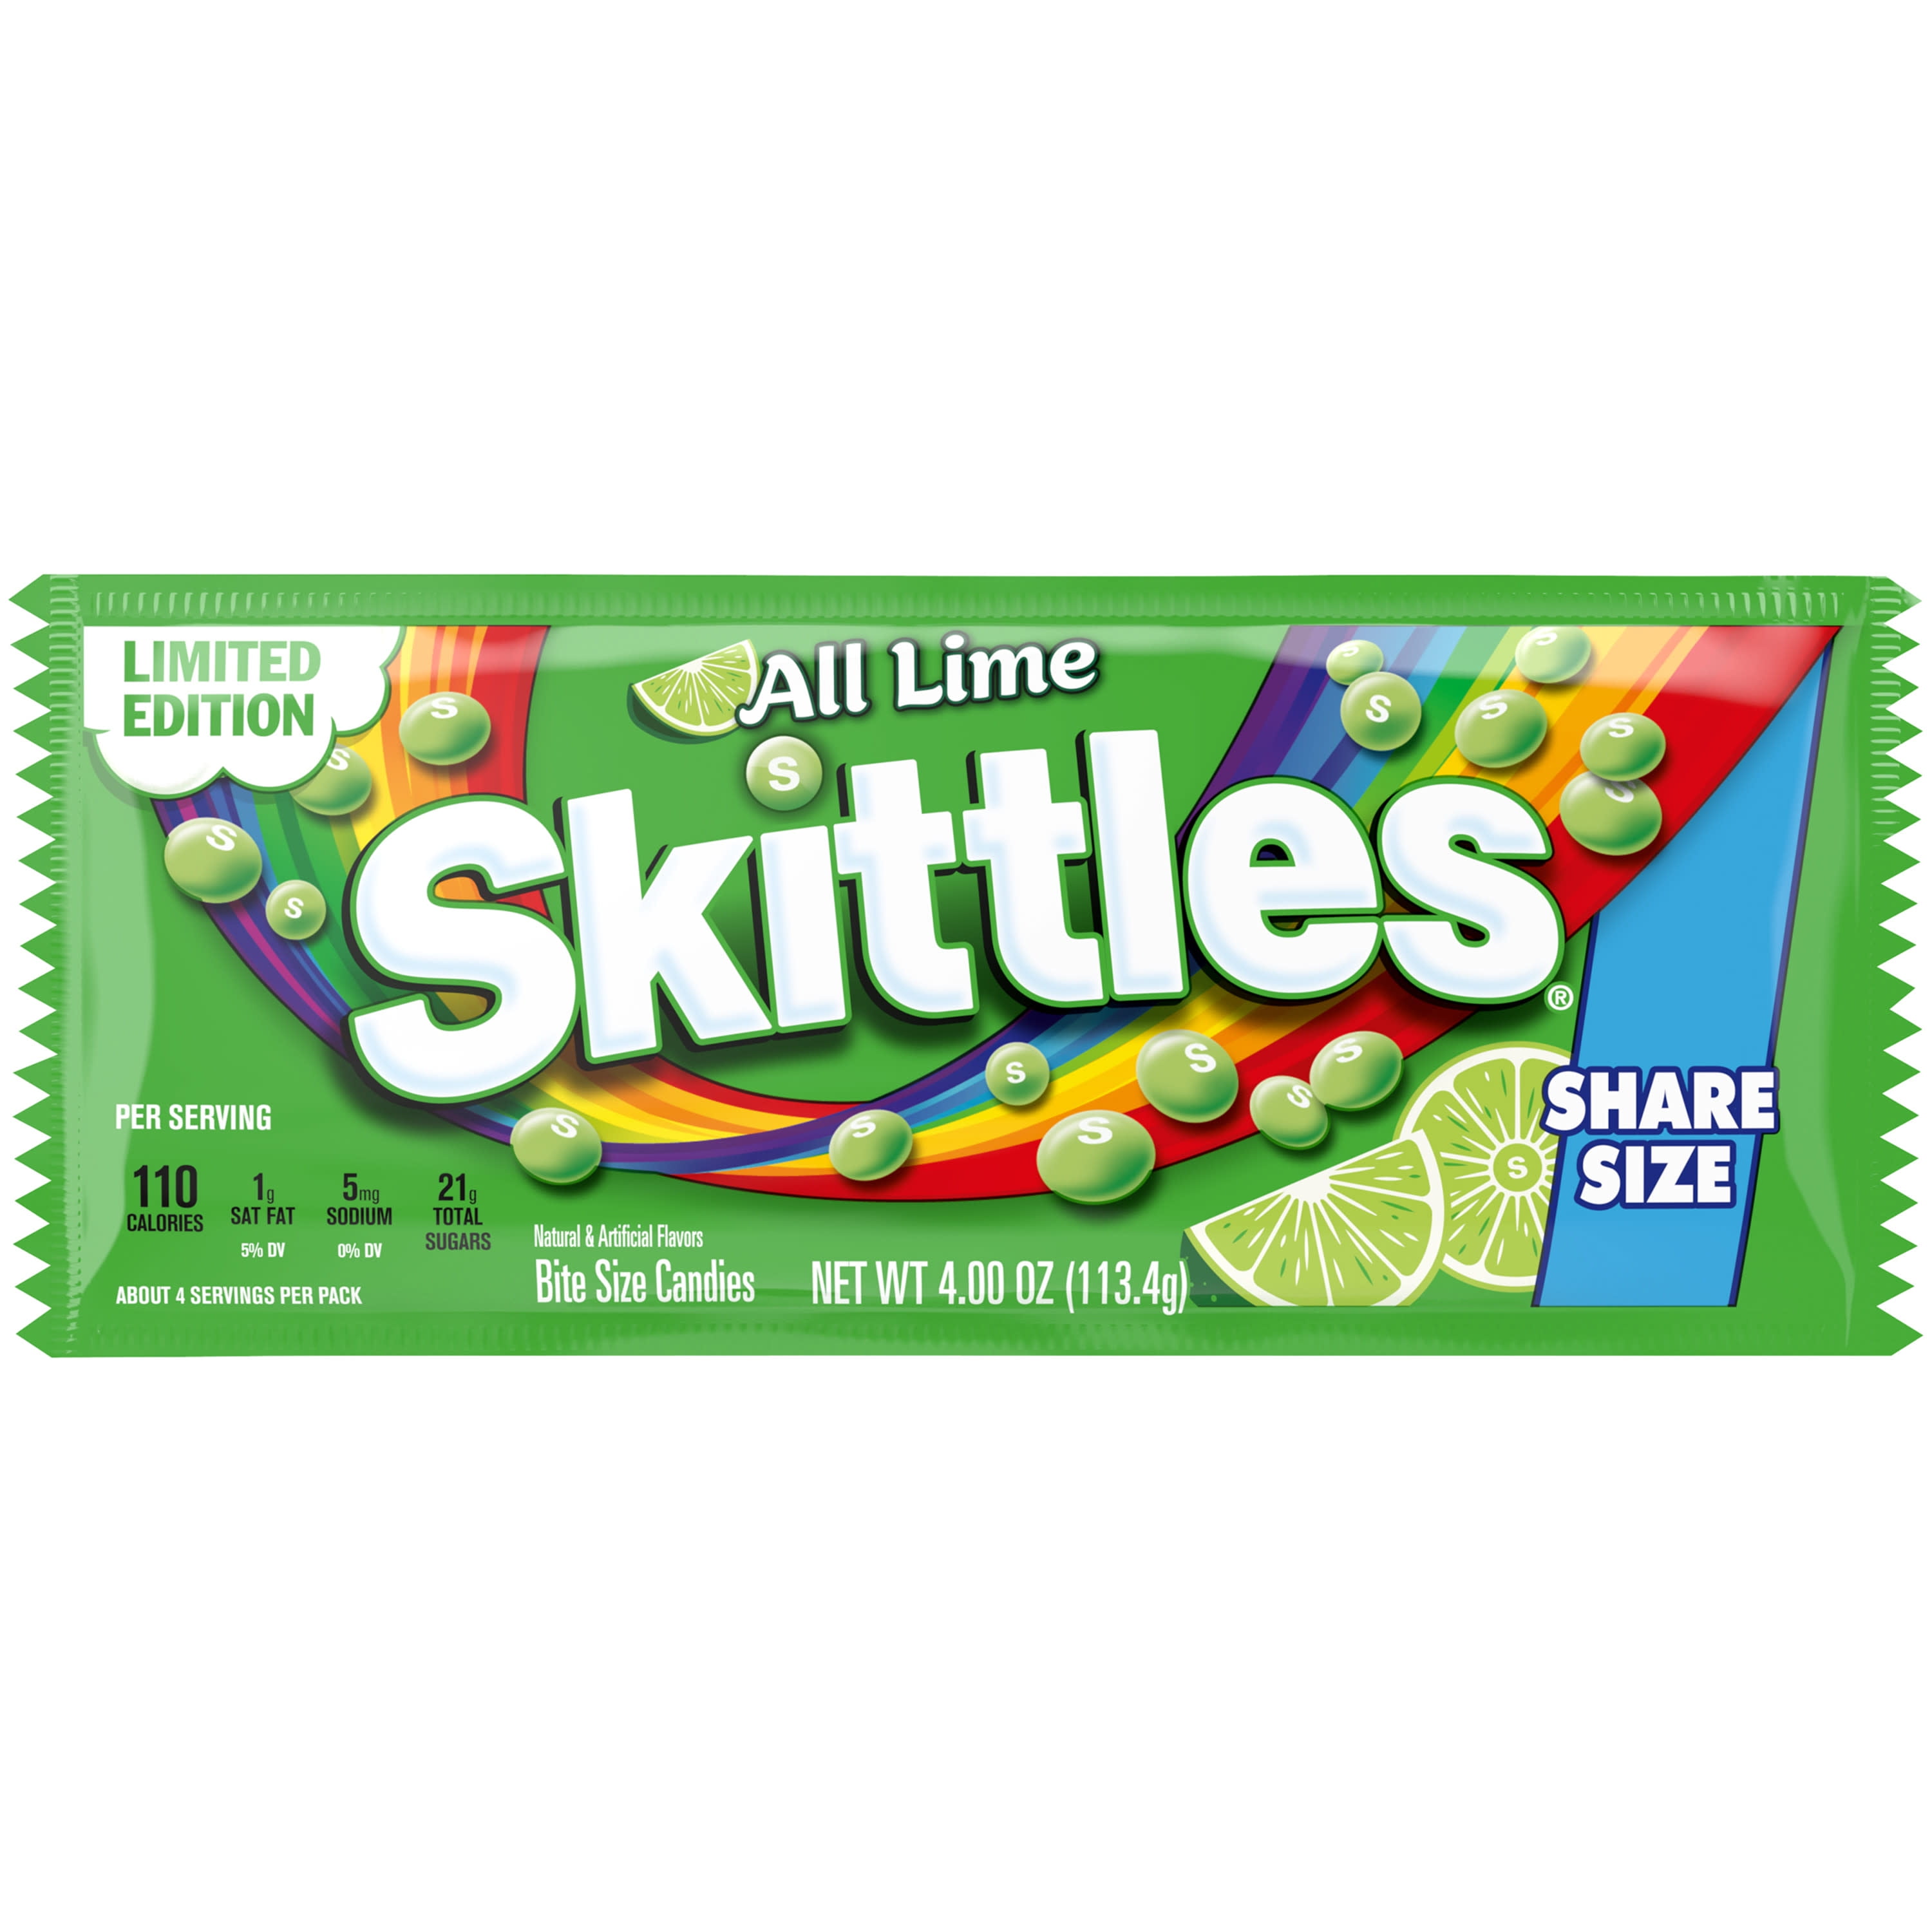 Skittles Candy — Snackathon Foods